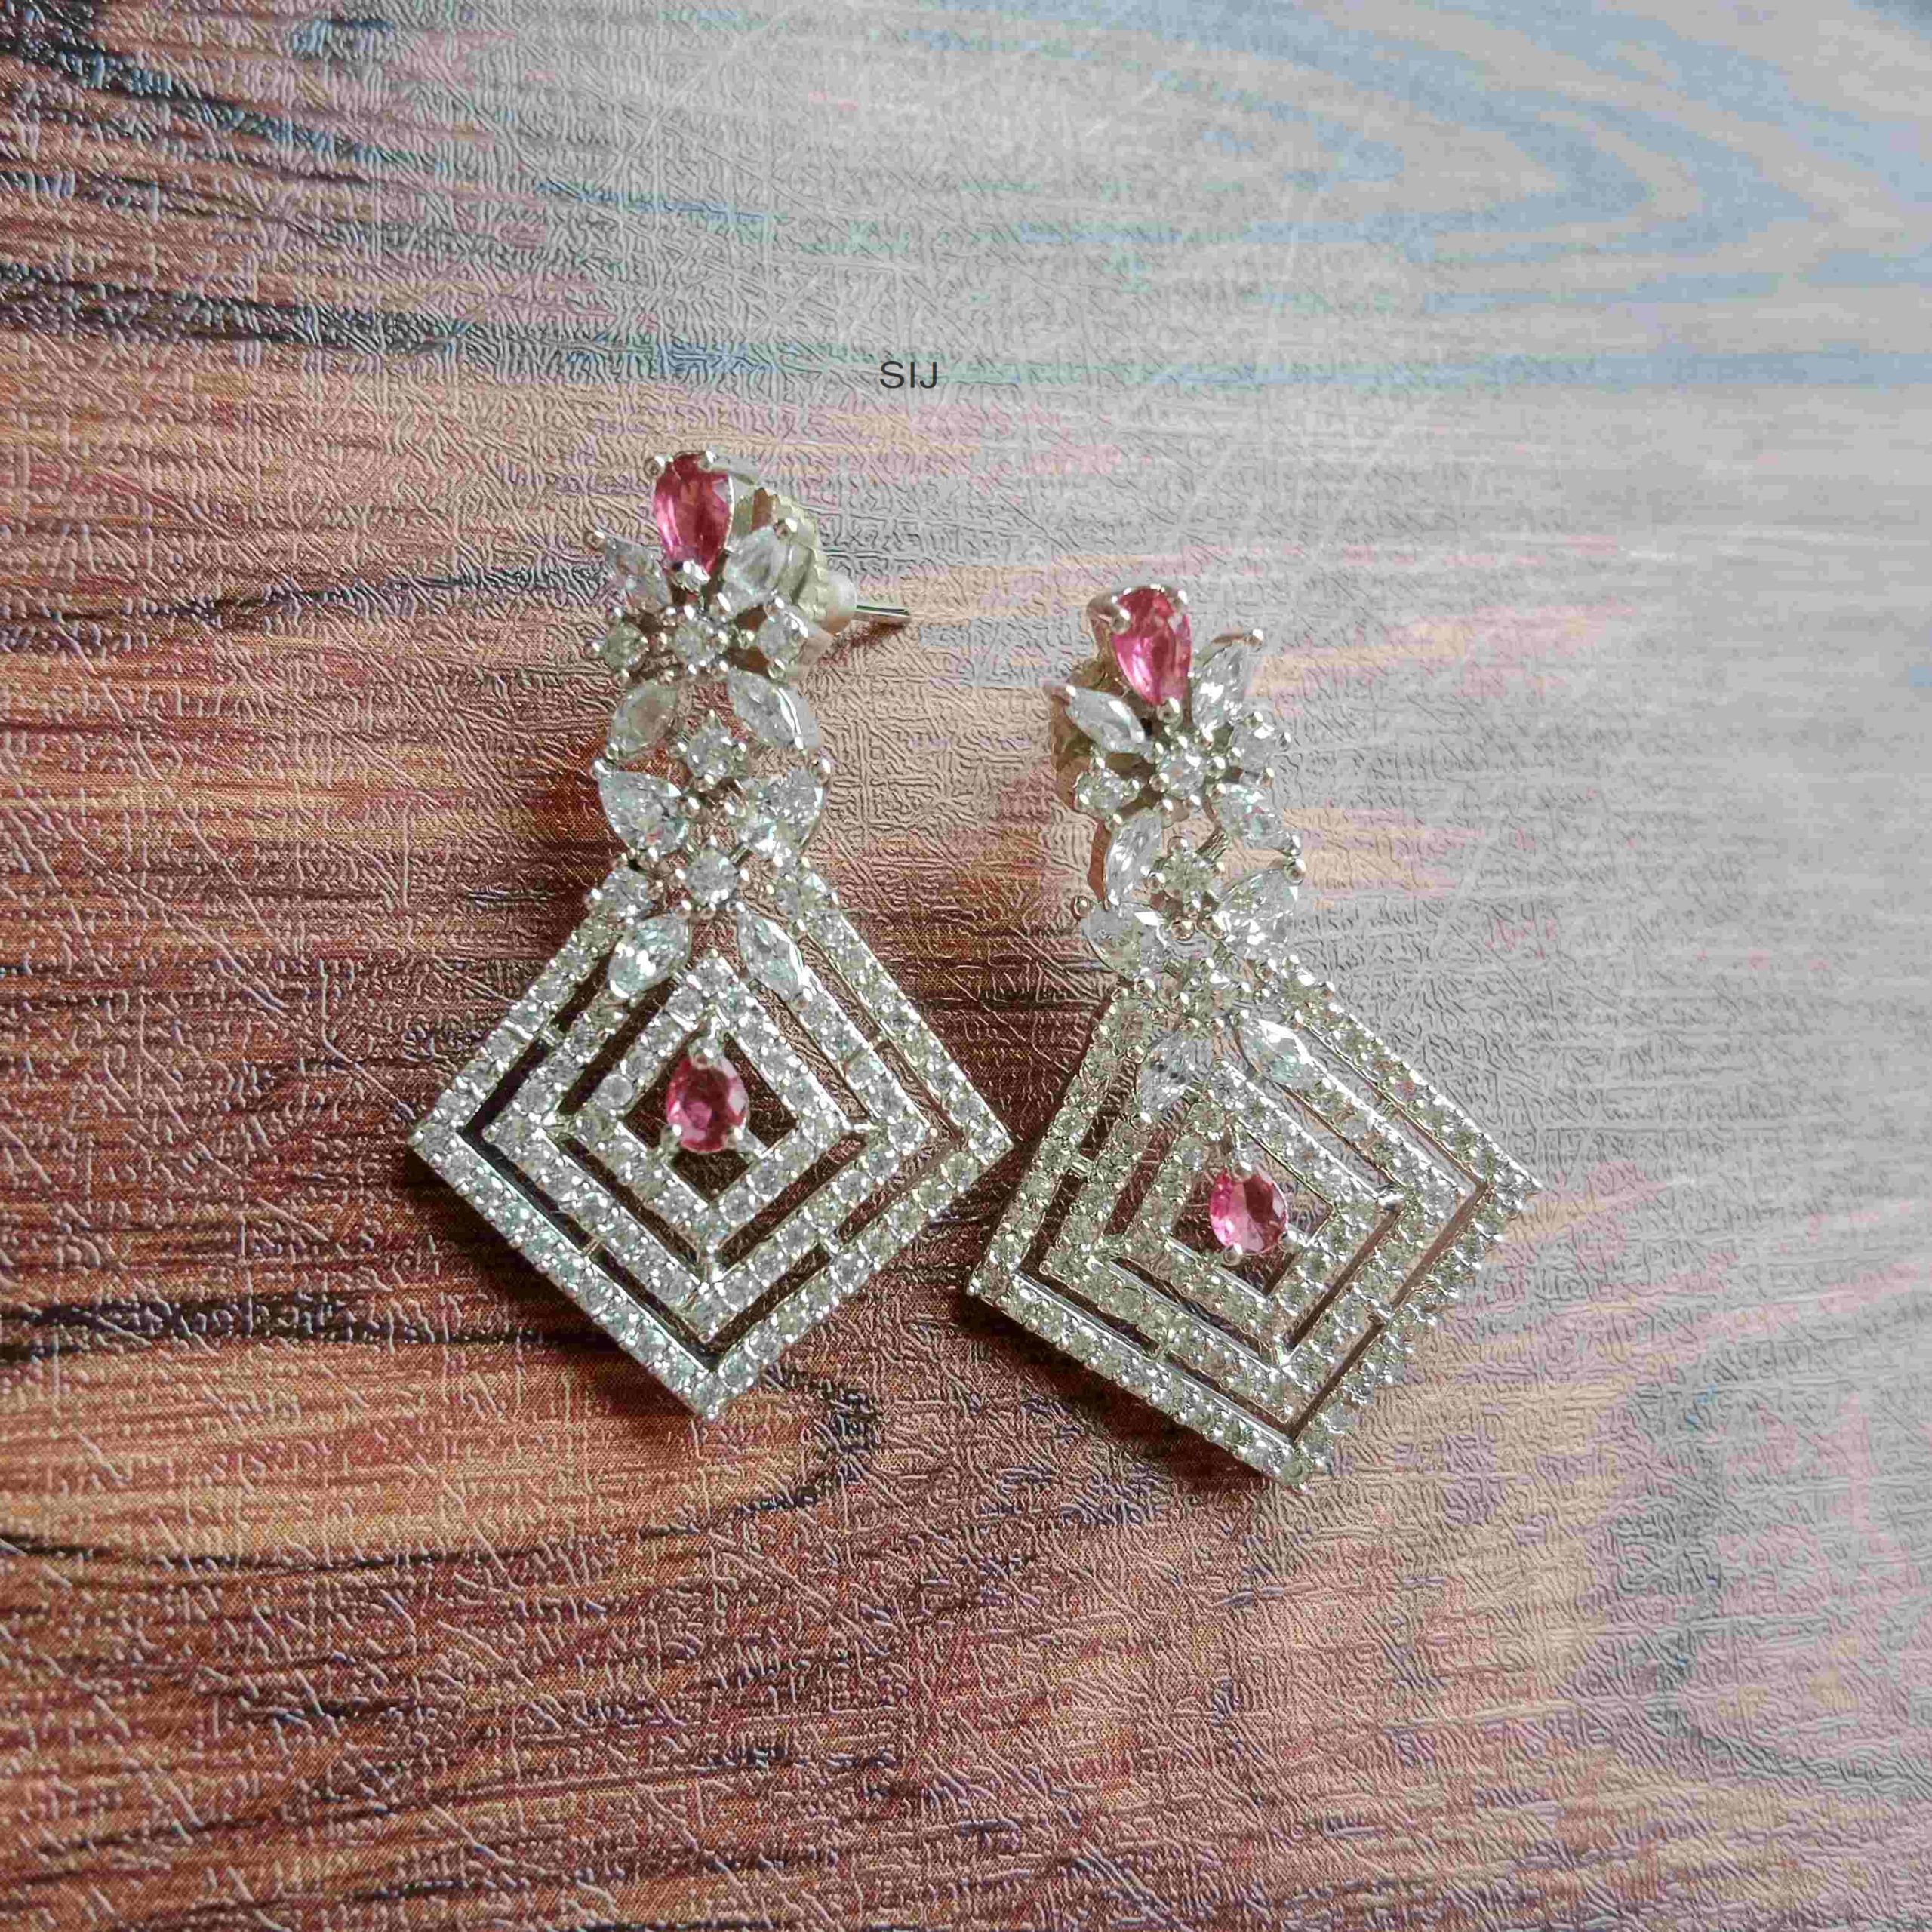 Imitation AD Stones and Ruby Earrings